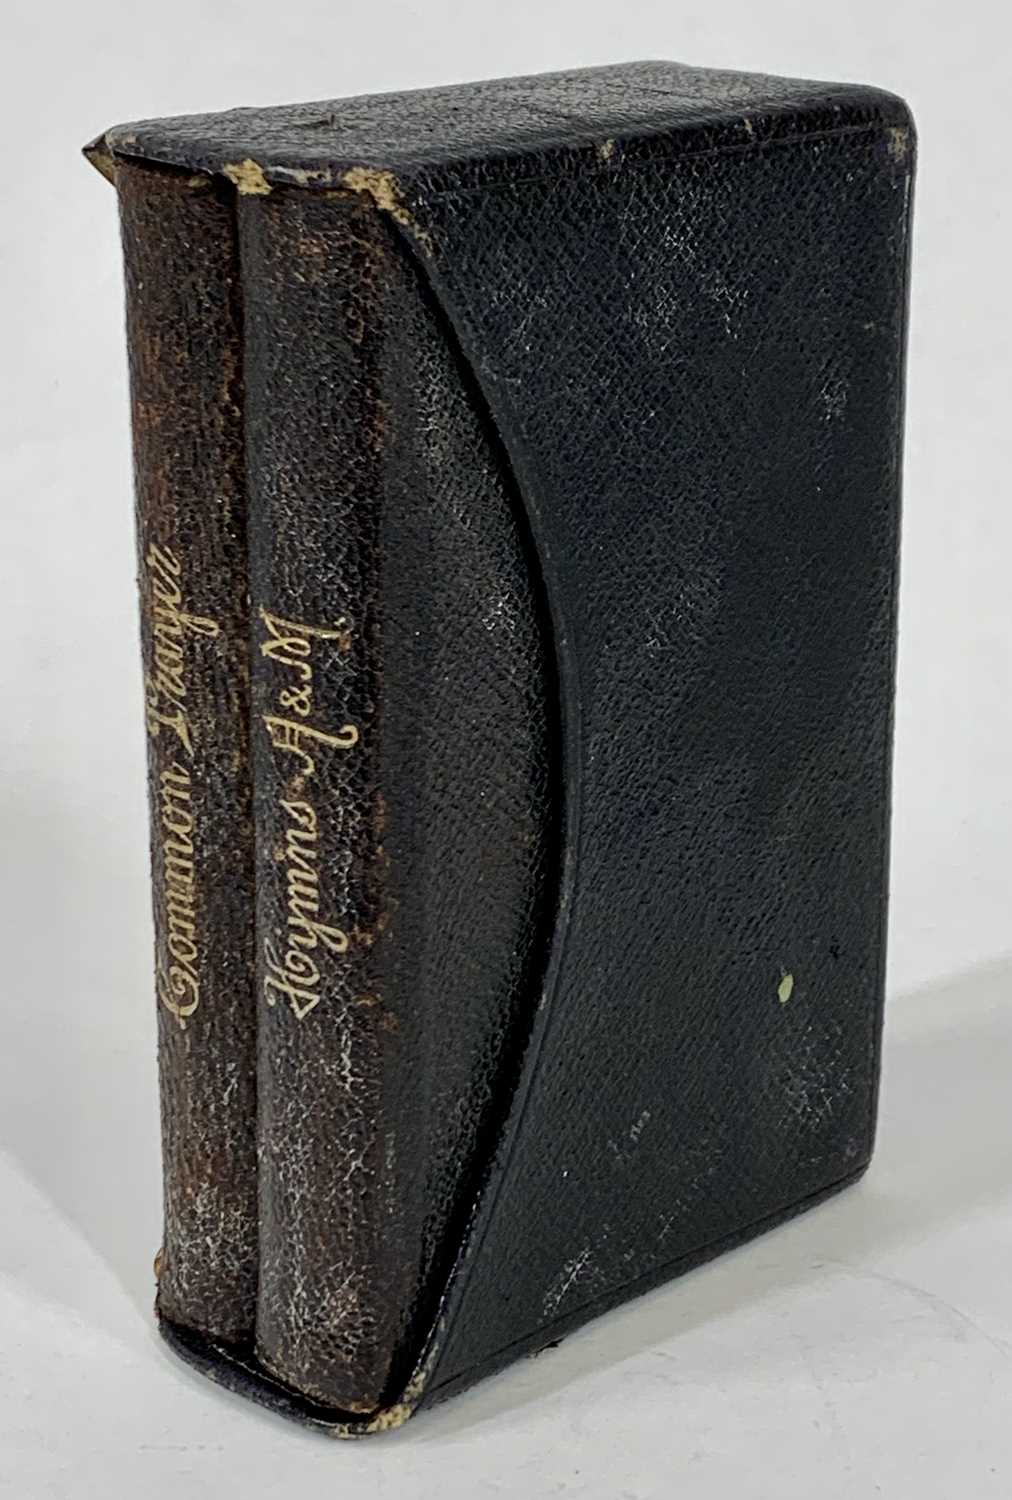 PRAYER & HYMN BOOKS WITH SILVER COVER, embossed with cherubs, heads and scrolls, containing - Image 3 of 3